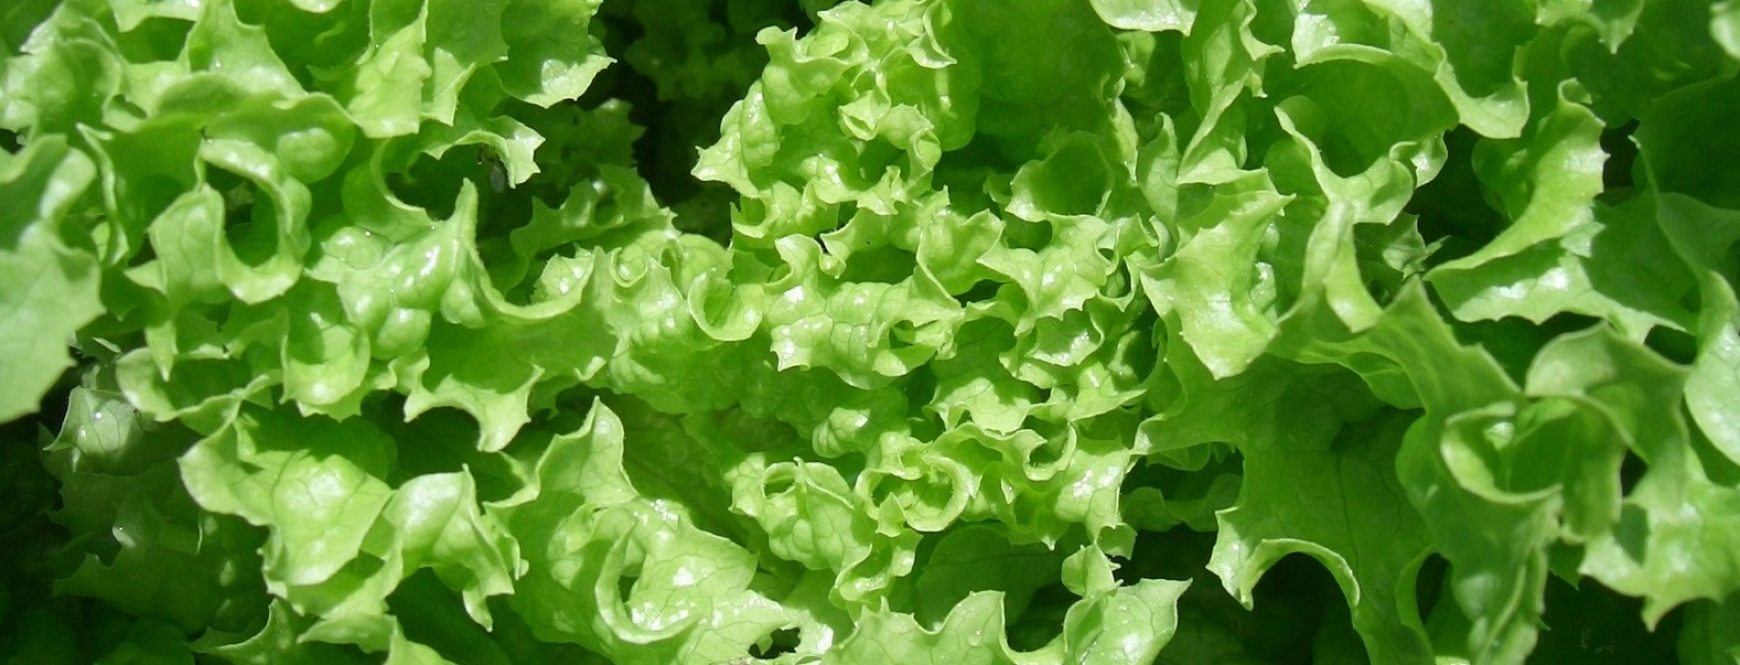 A close up of lettuce leaves